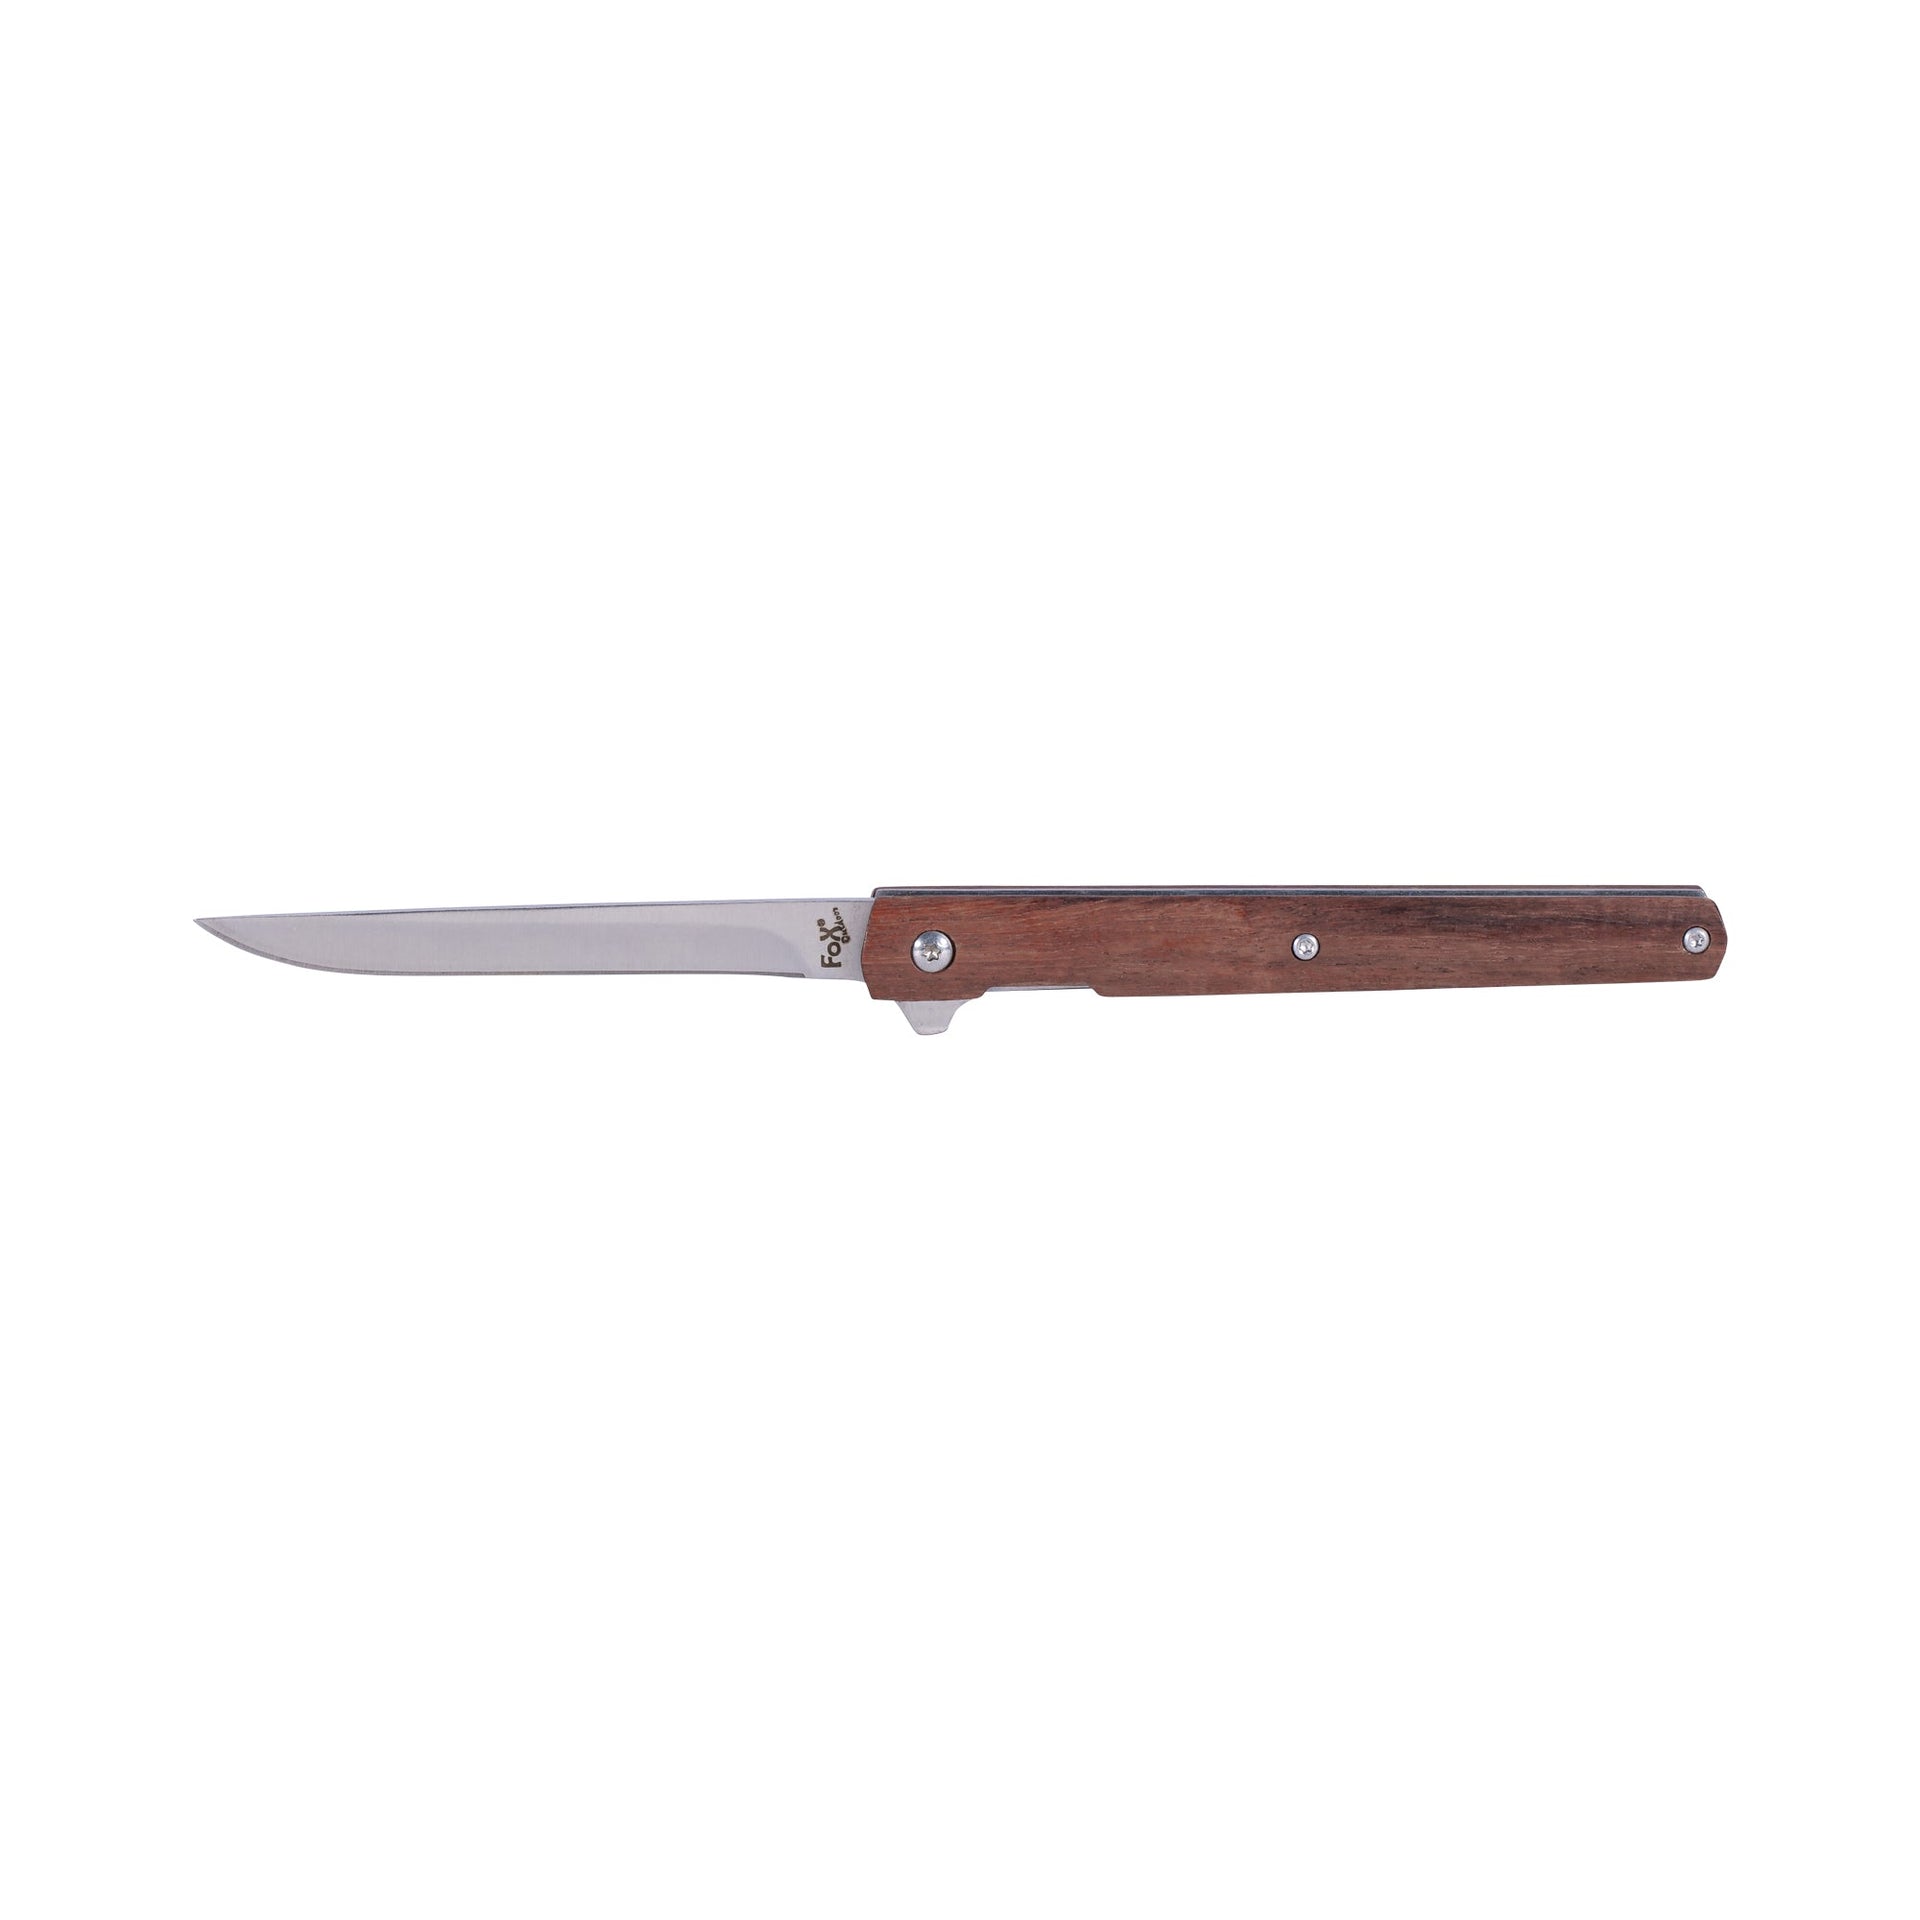 Slim folding knife with   wooden handle